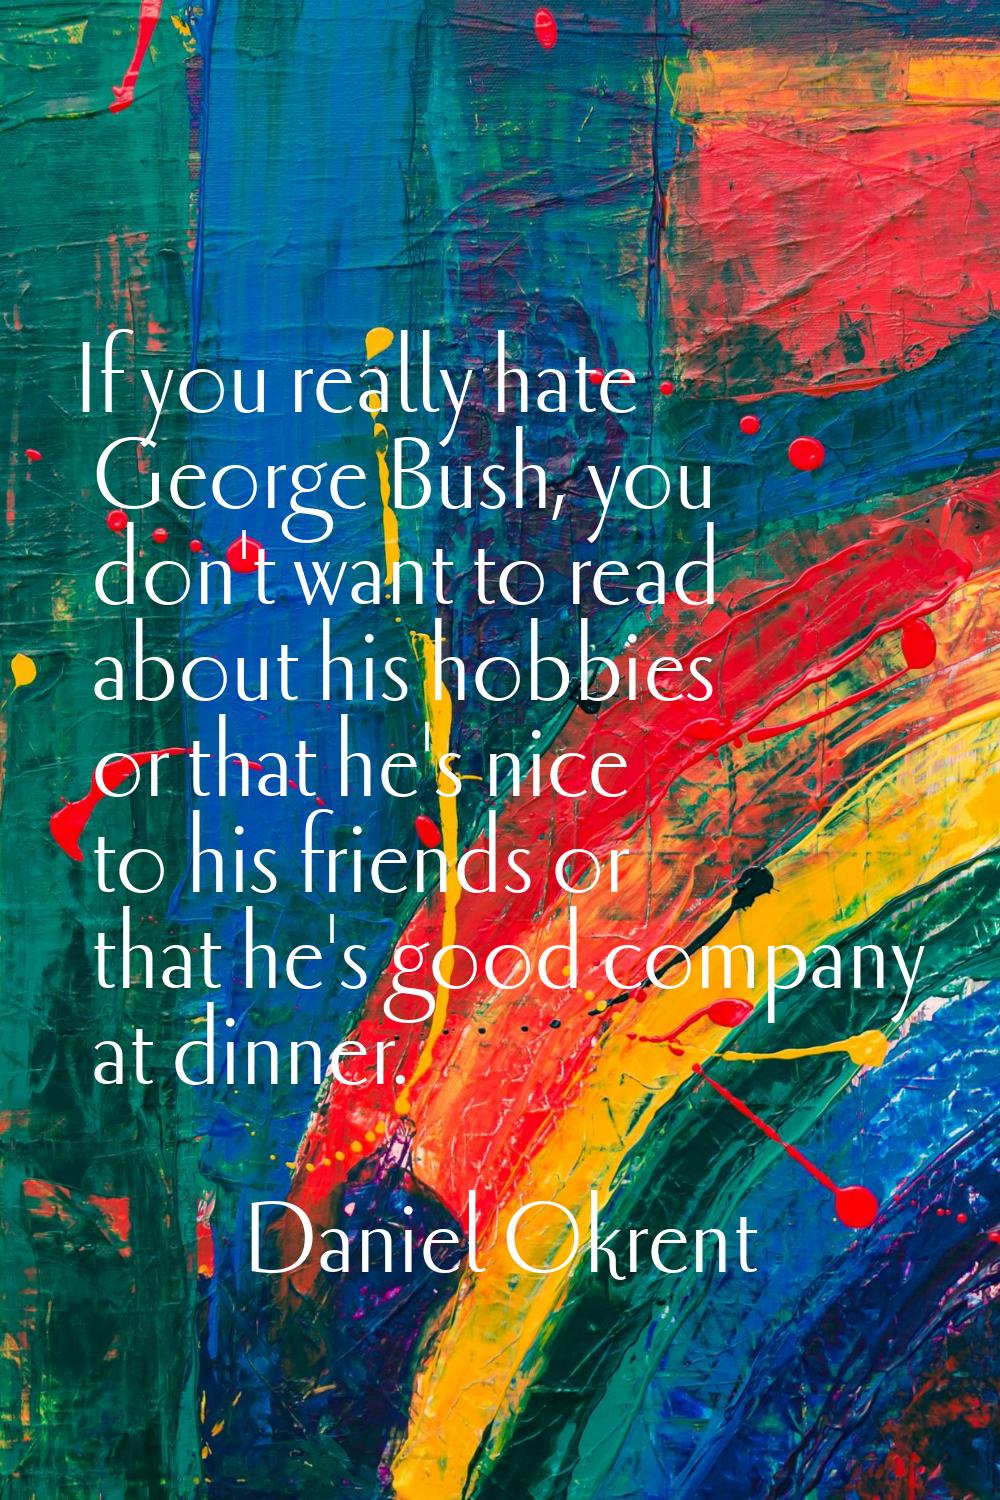 If you really hate George Bush, you don't want to read about his hobbies or that he's nice to his f